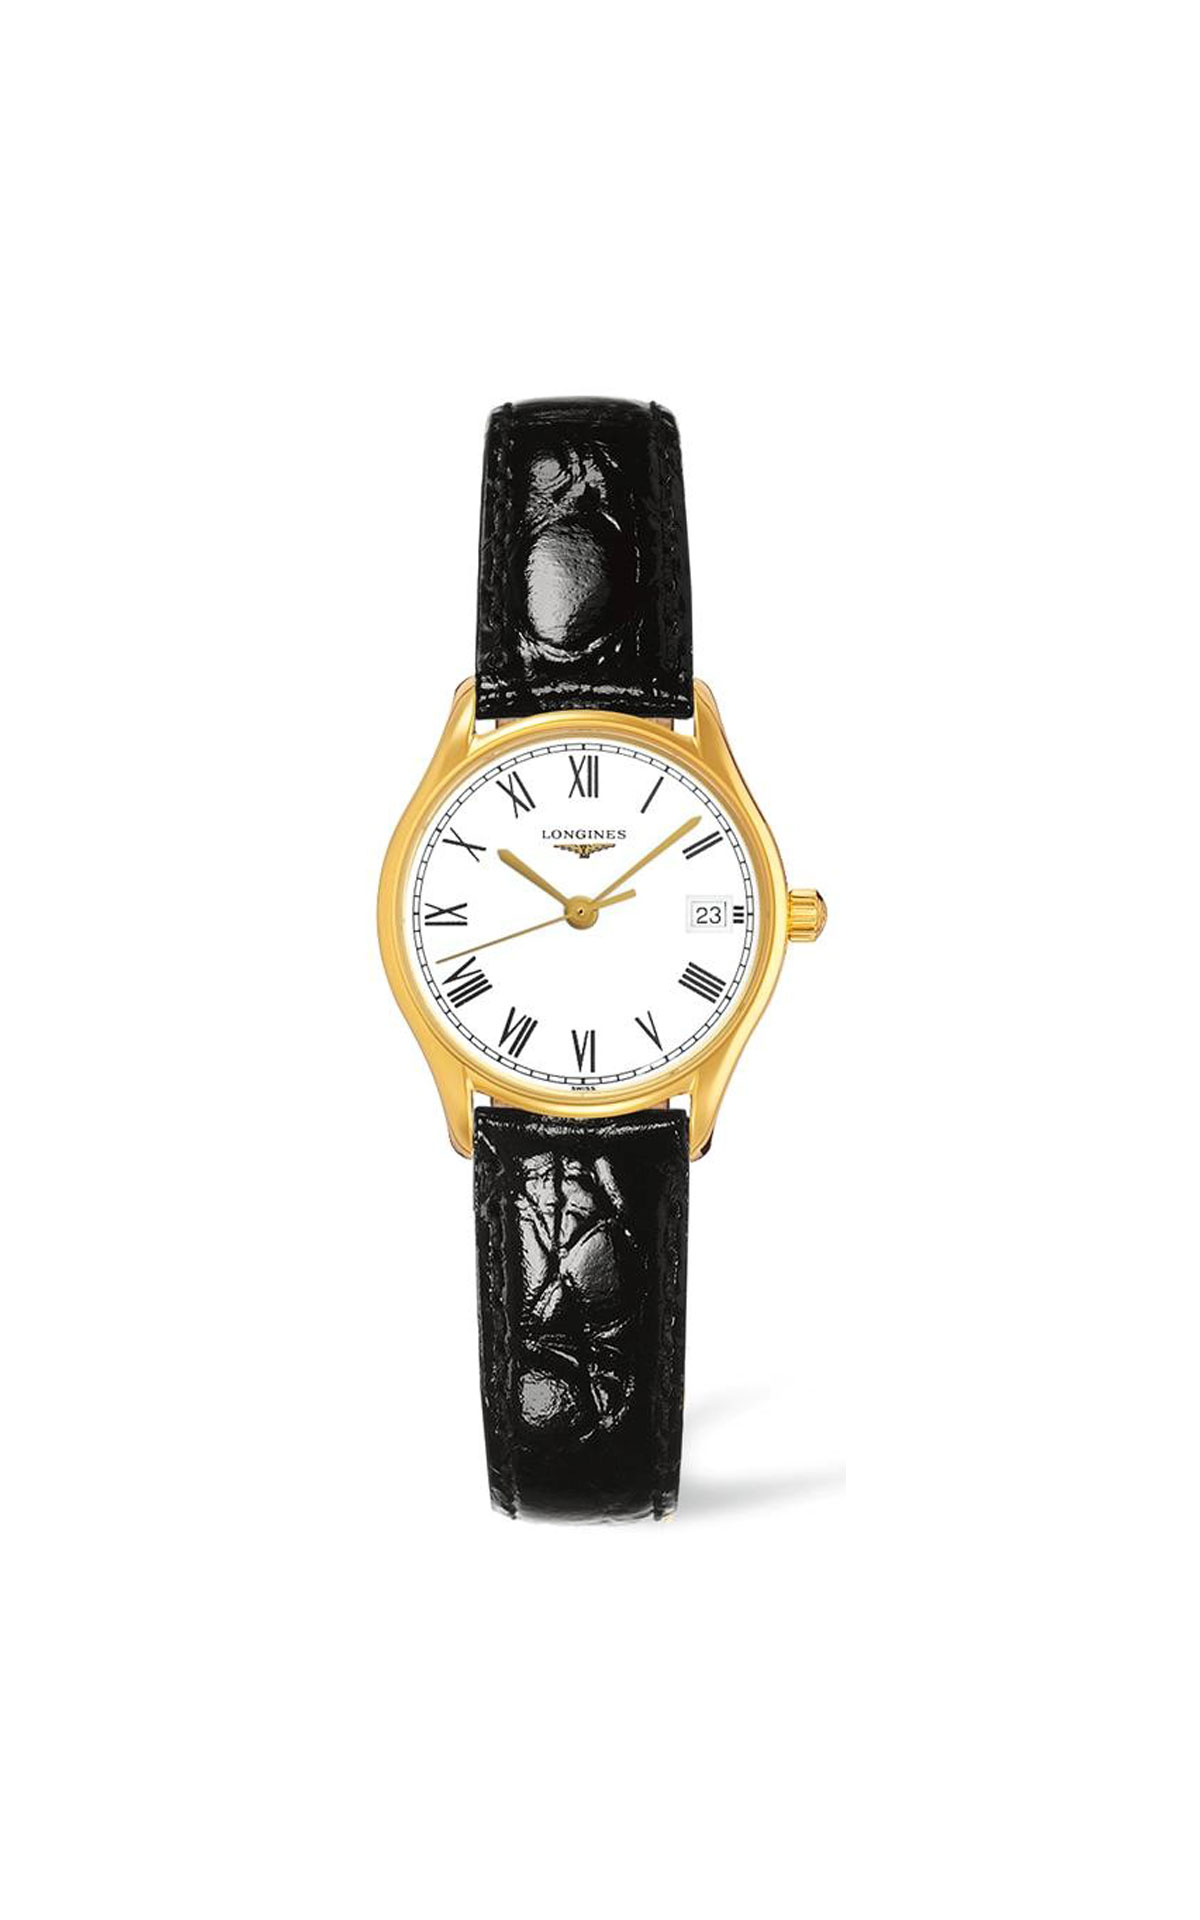 Hour Passion Longines Lyre Ladies Watch from Bicester Village